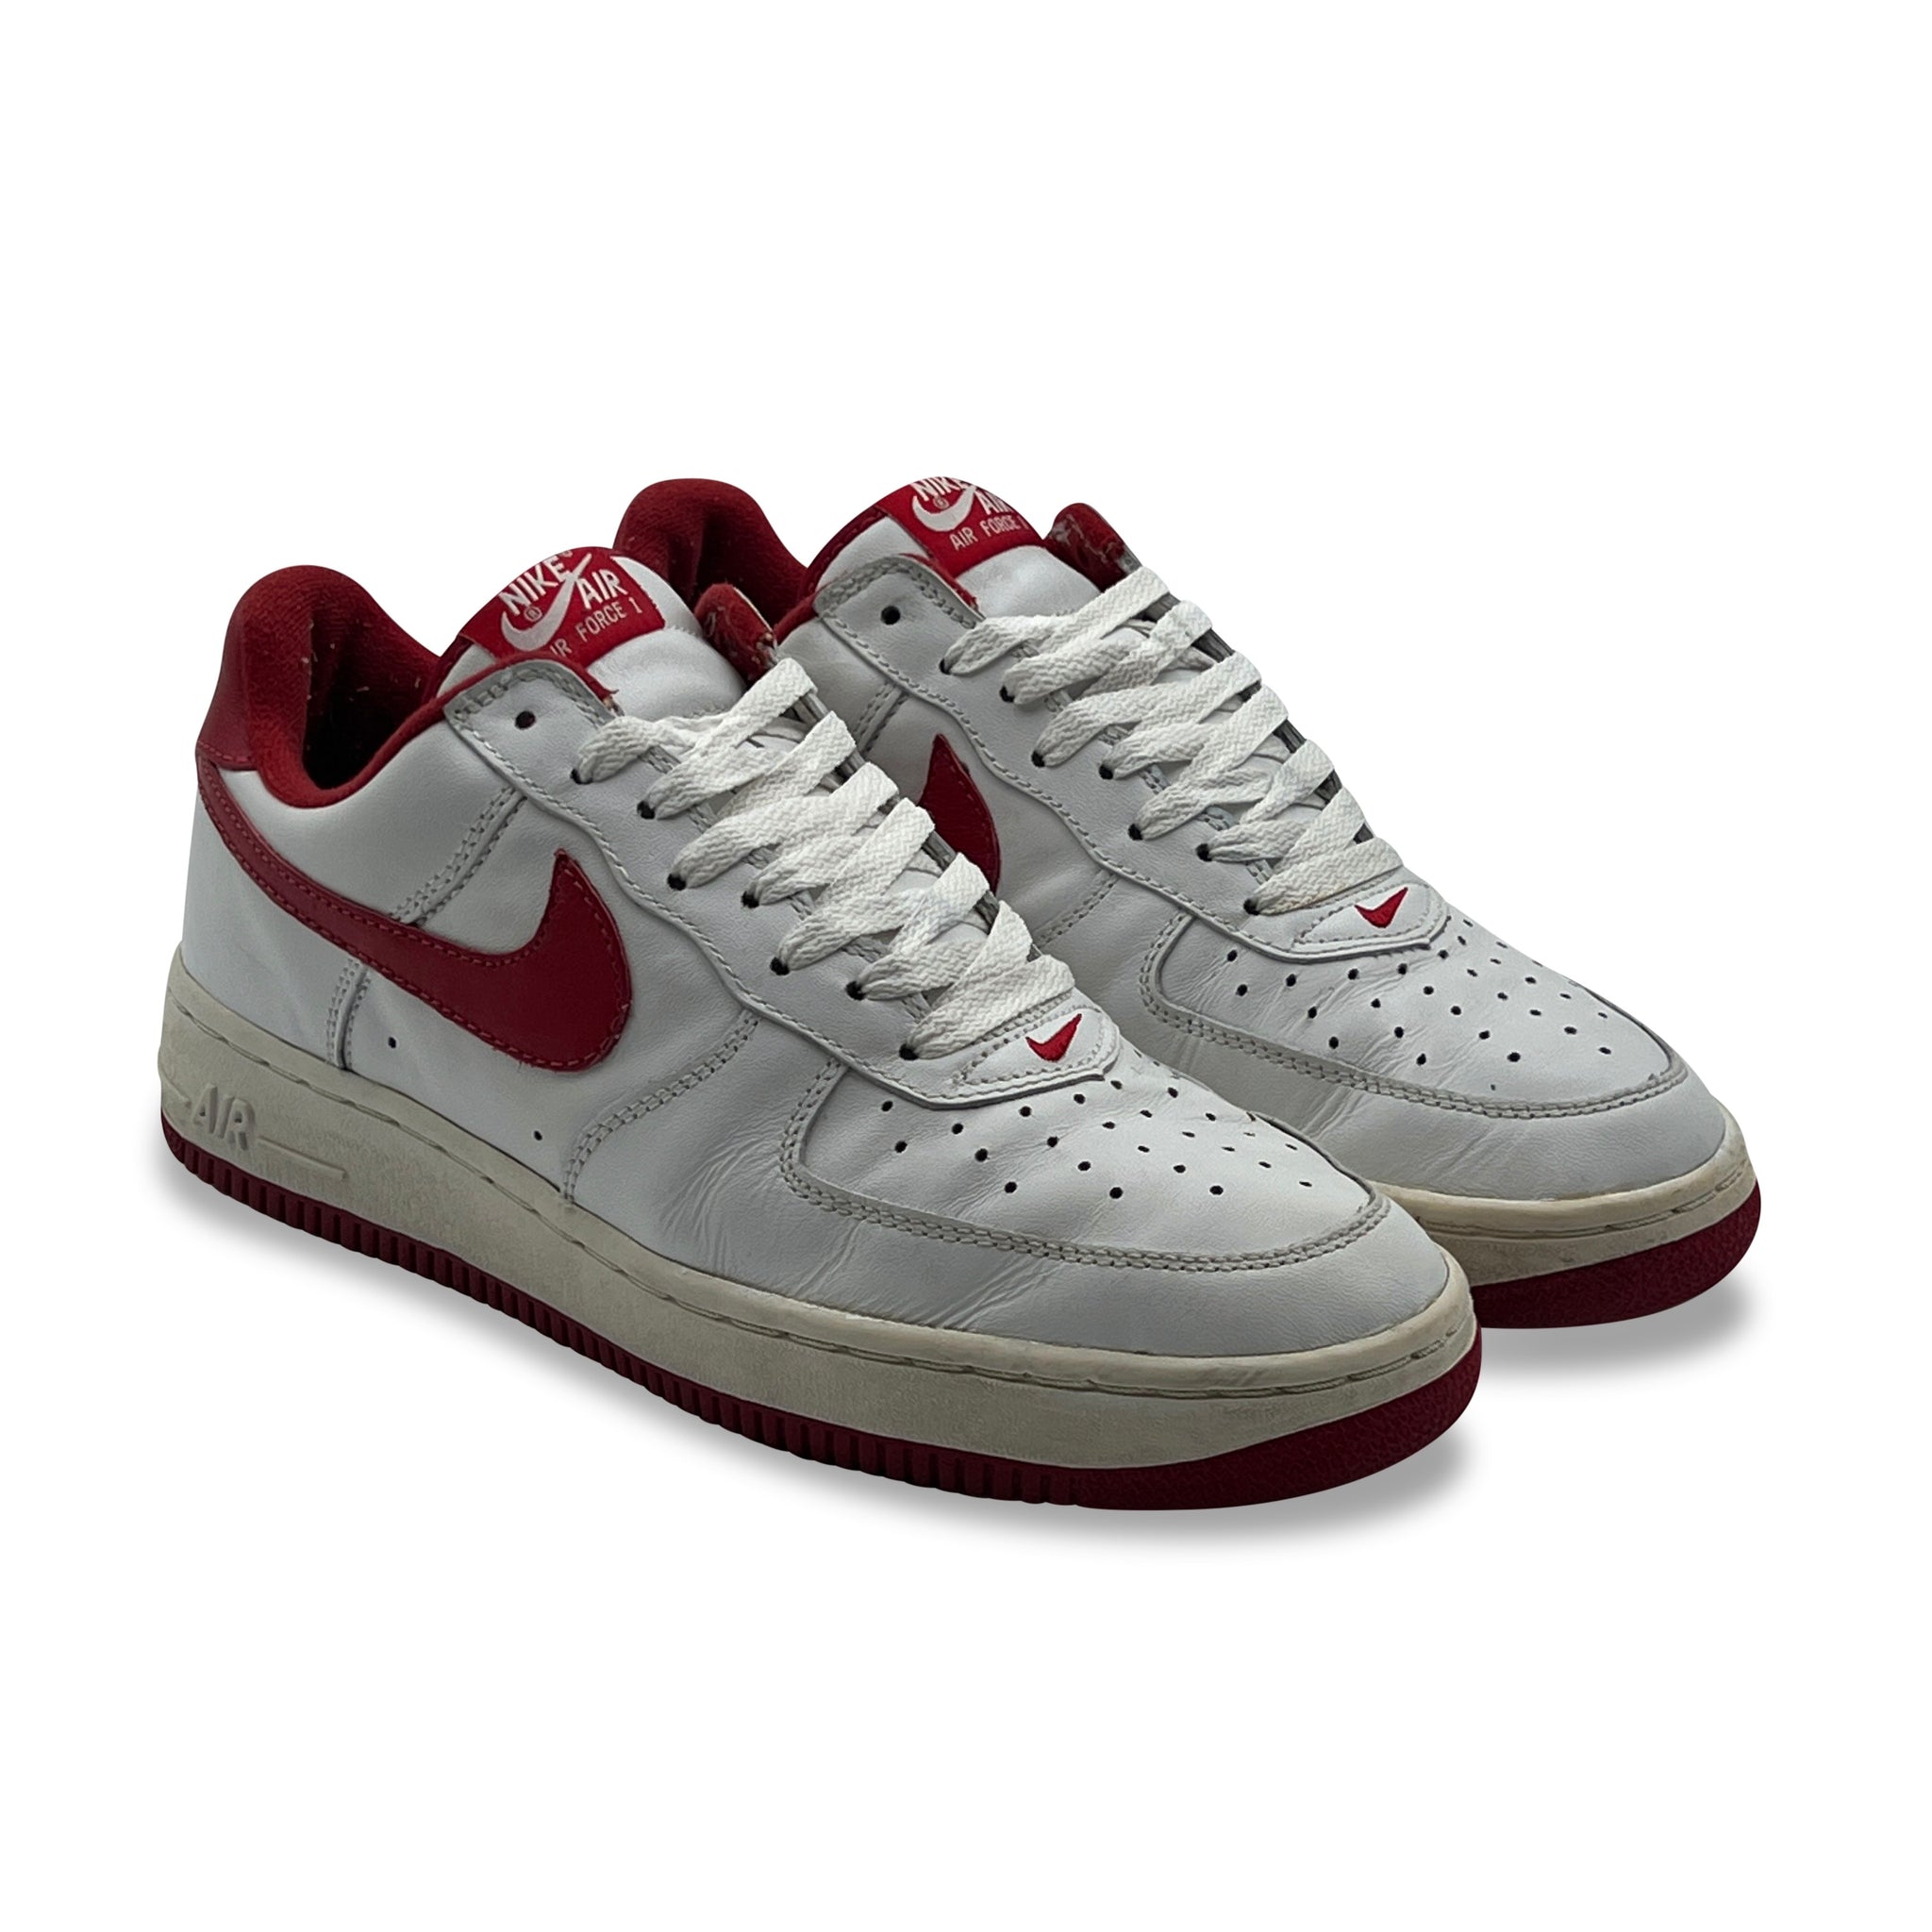 9 US - NIKE AIR FORCE 1 WHITE/RED SAMPLE 1999